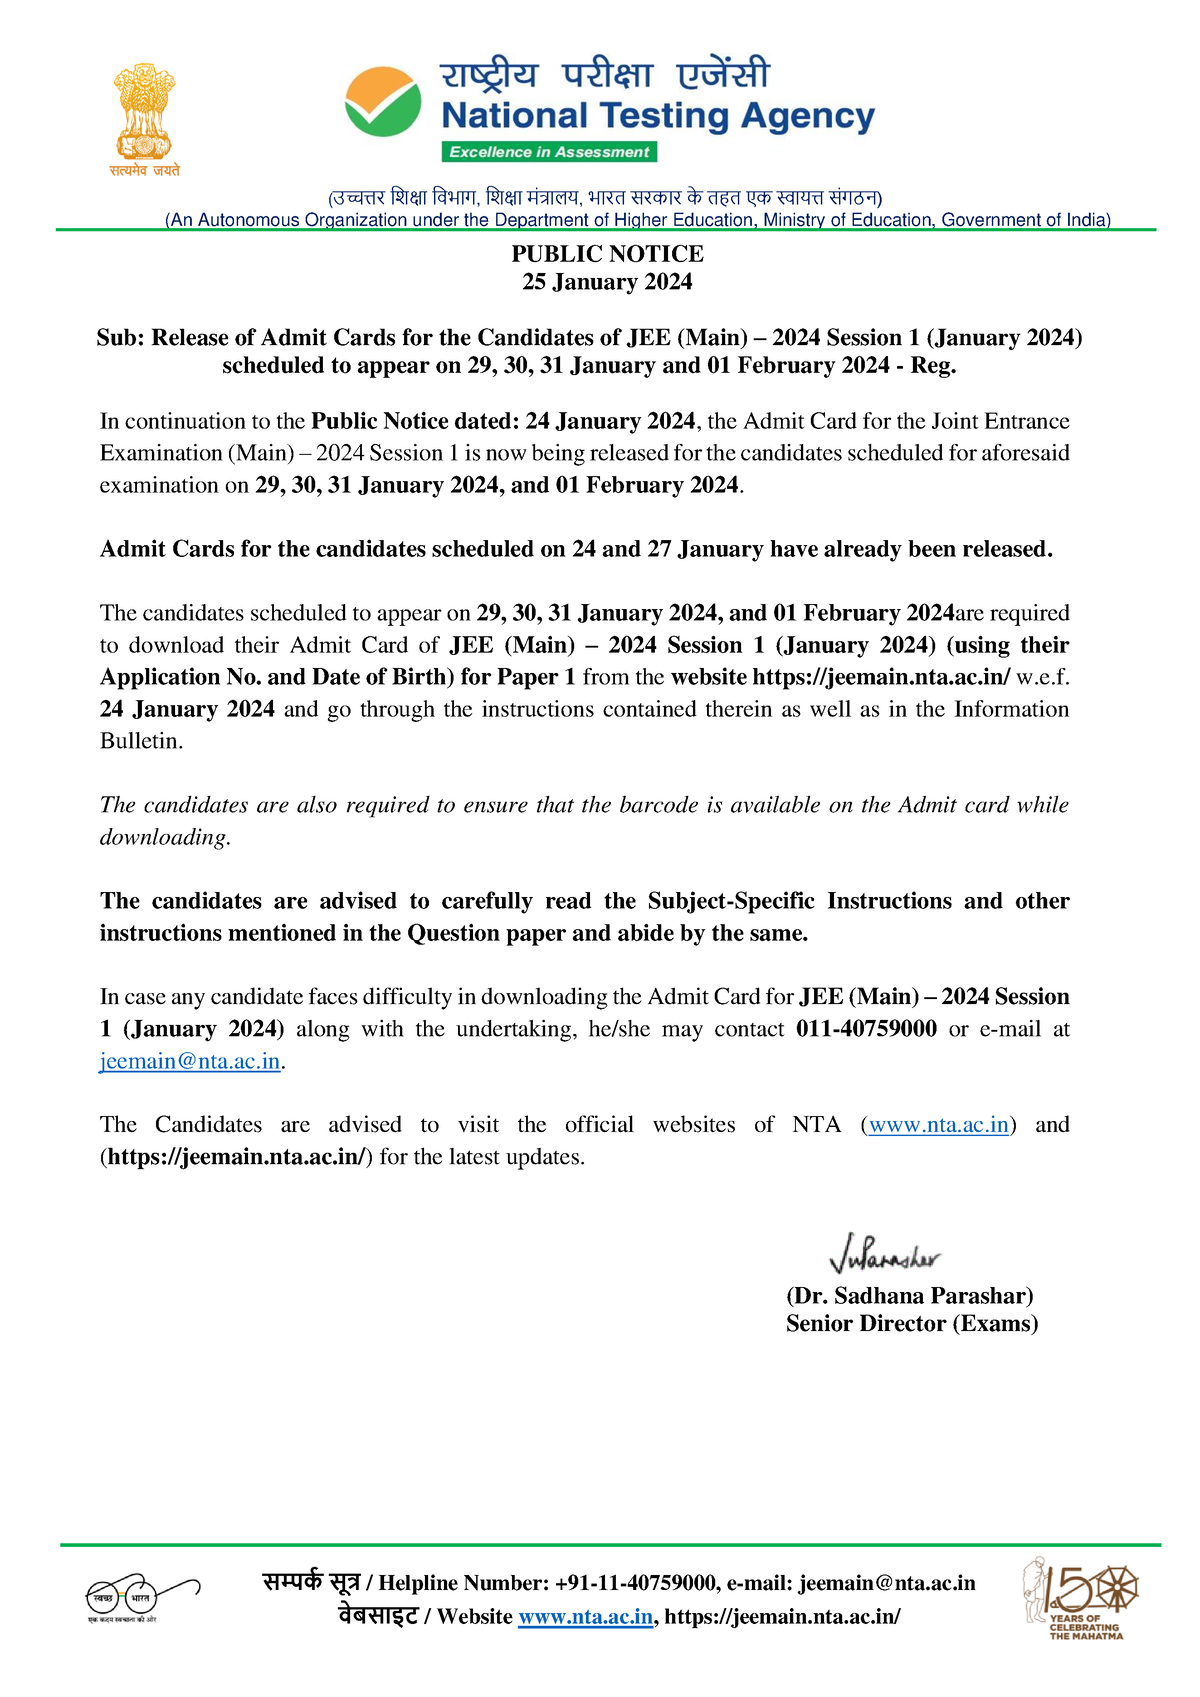 Notice for Release of Admit Card for JEE (Main) 2024 Session 1 25